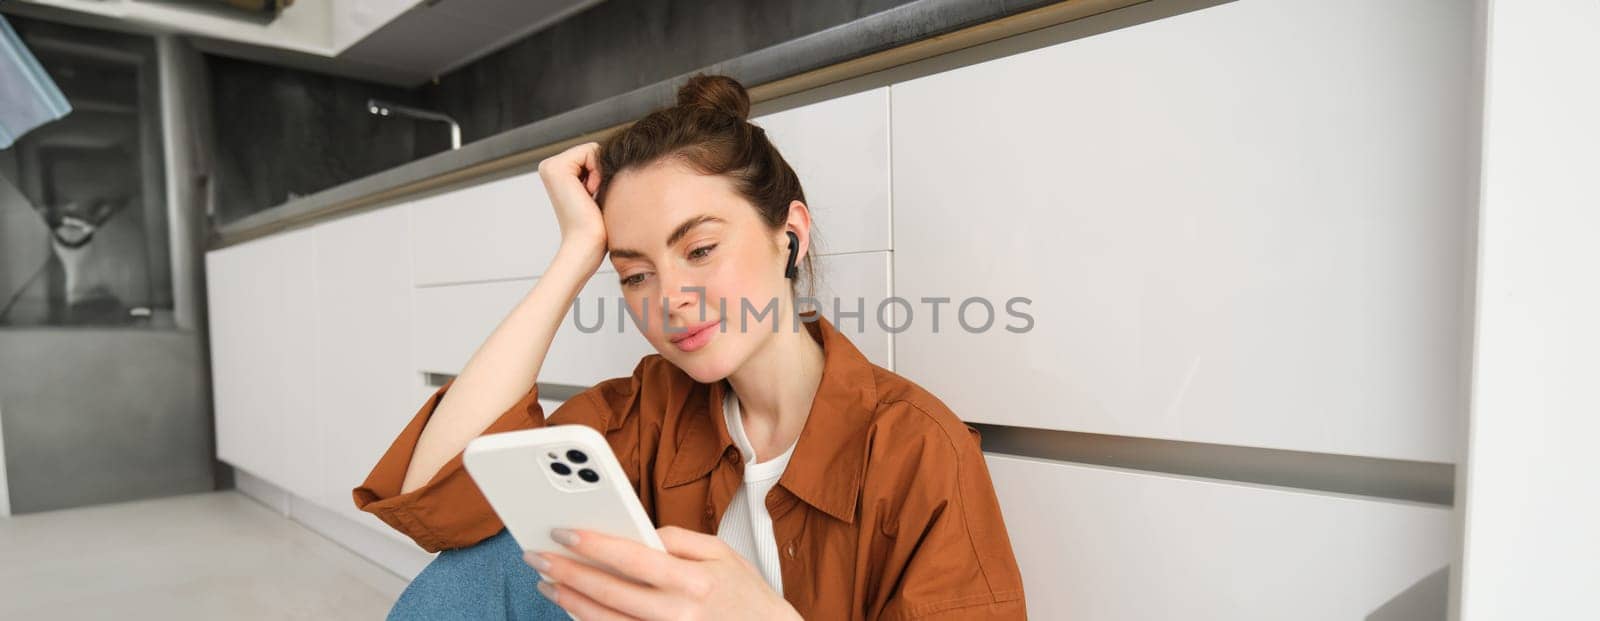 Portrait of beautiful smiling woman sitting on kitchen floor, scrolling social media on mobile phone, listening music in wireless headphones.